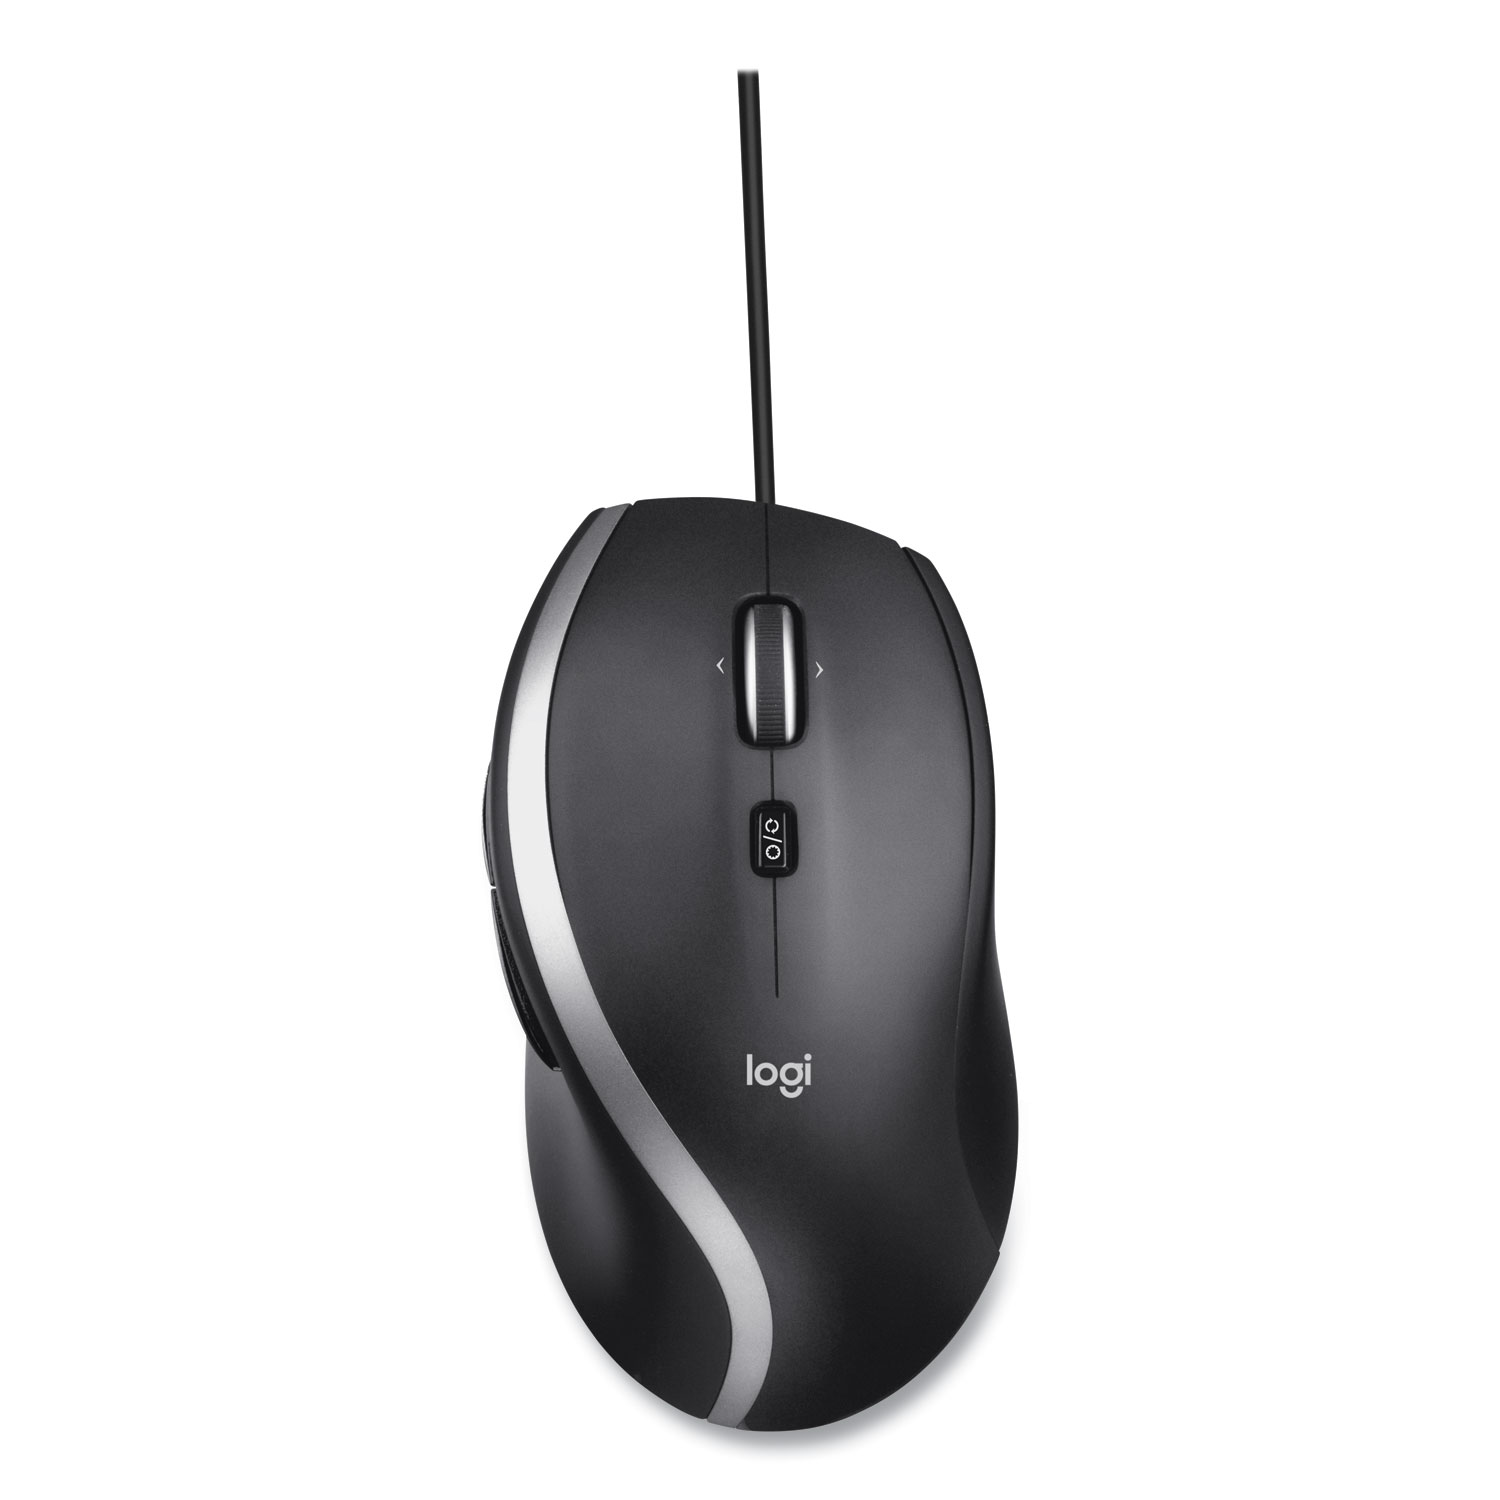  Logitech 910-005783 Advanced Corded Mouse M500s, USB, Right Hand Use, Black (LOG910005783) 